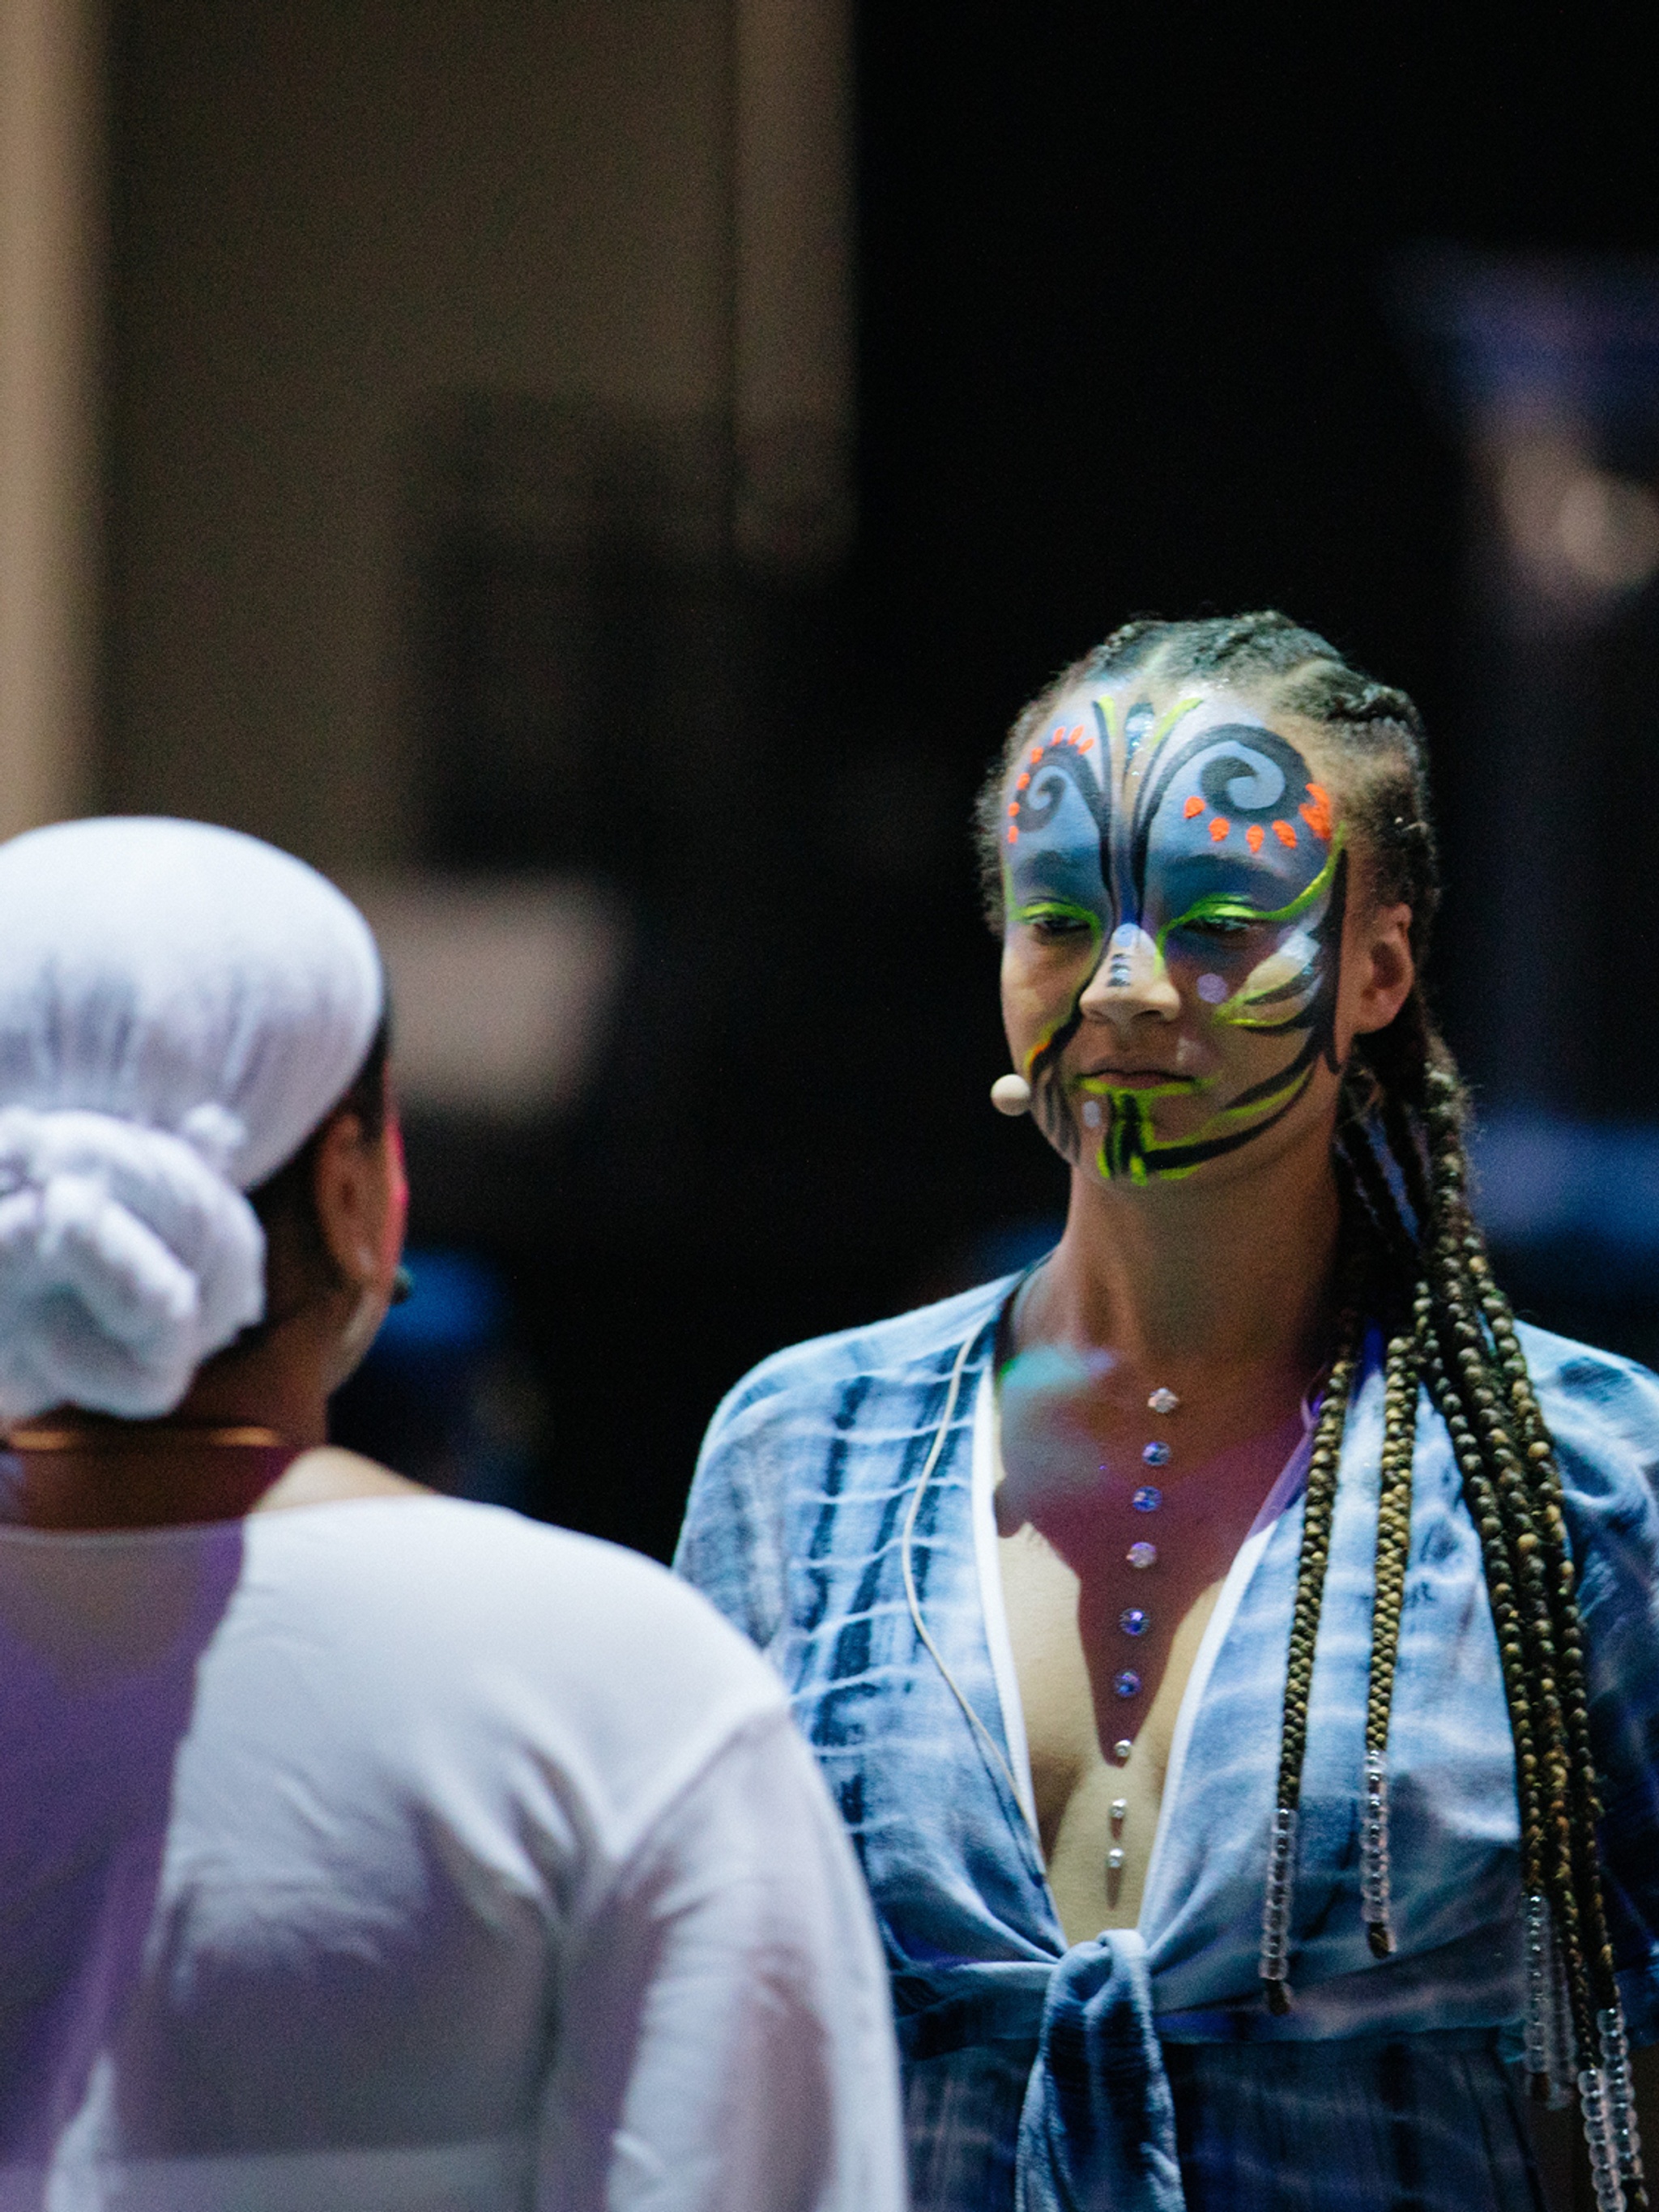 A person with face paint resembling a butterfly faces another performer who is seen from the back. 